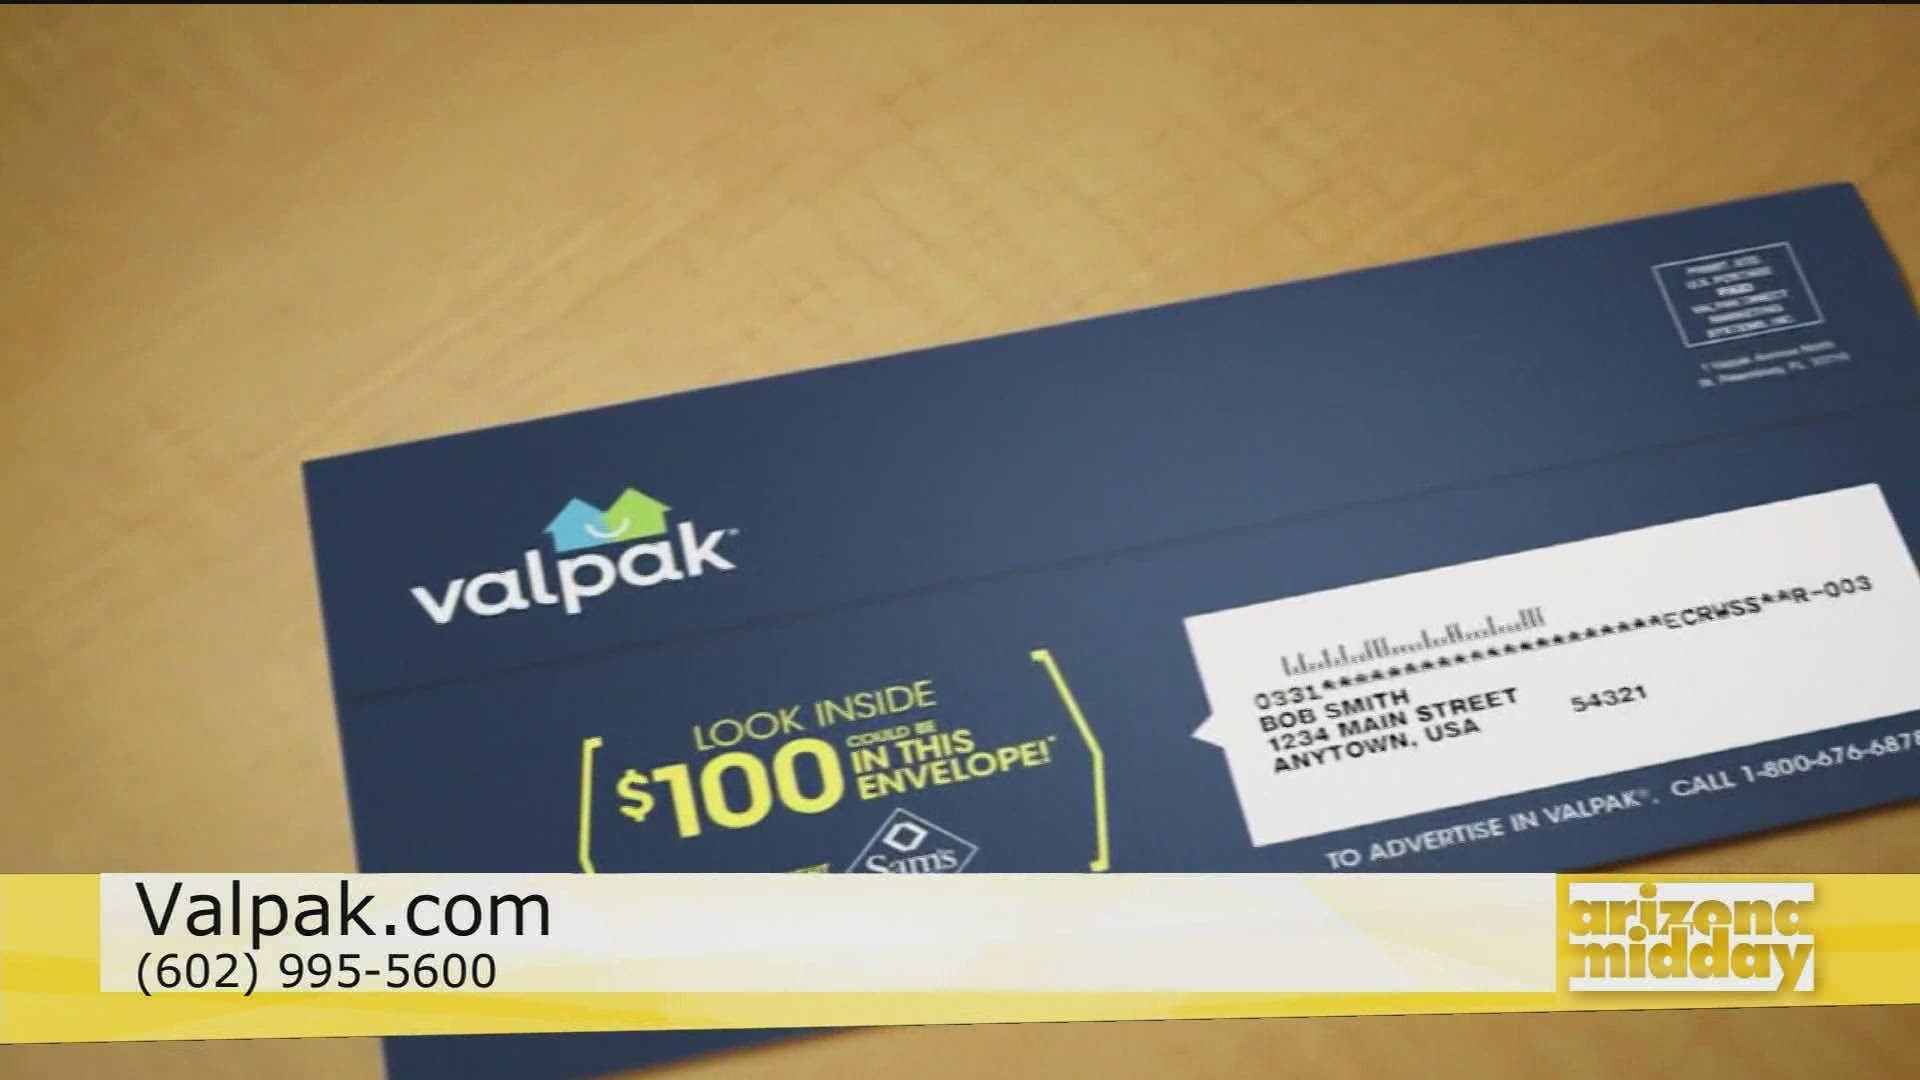 Tawna Wedin with Valpak shows us some of the great offers that come in the little blue envelops each month